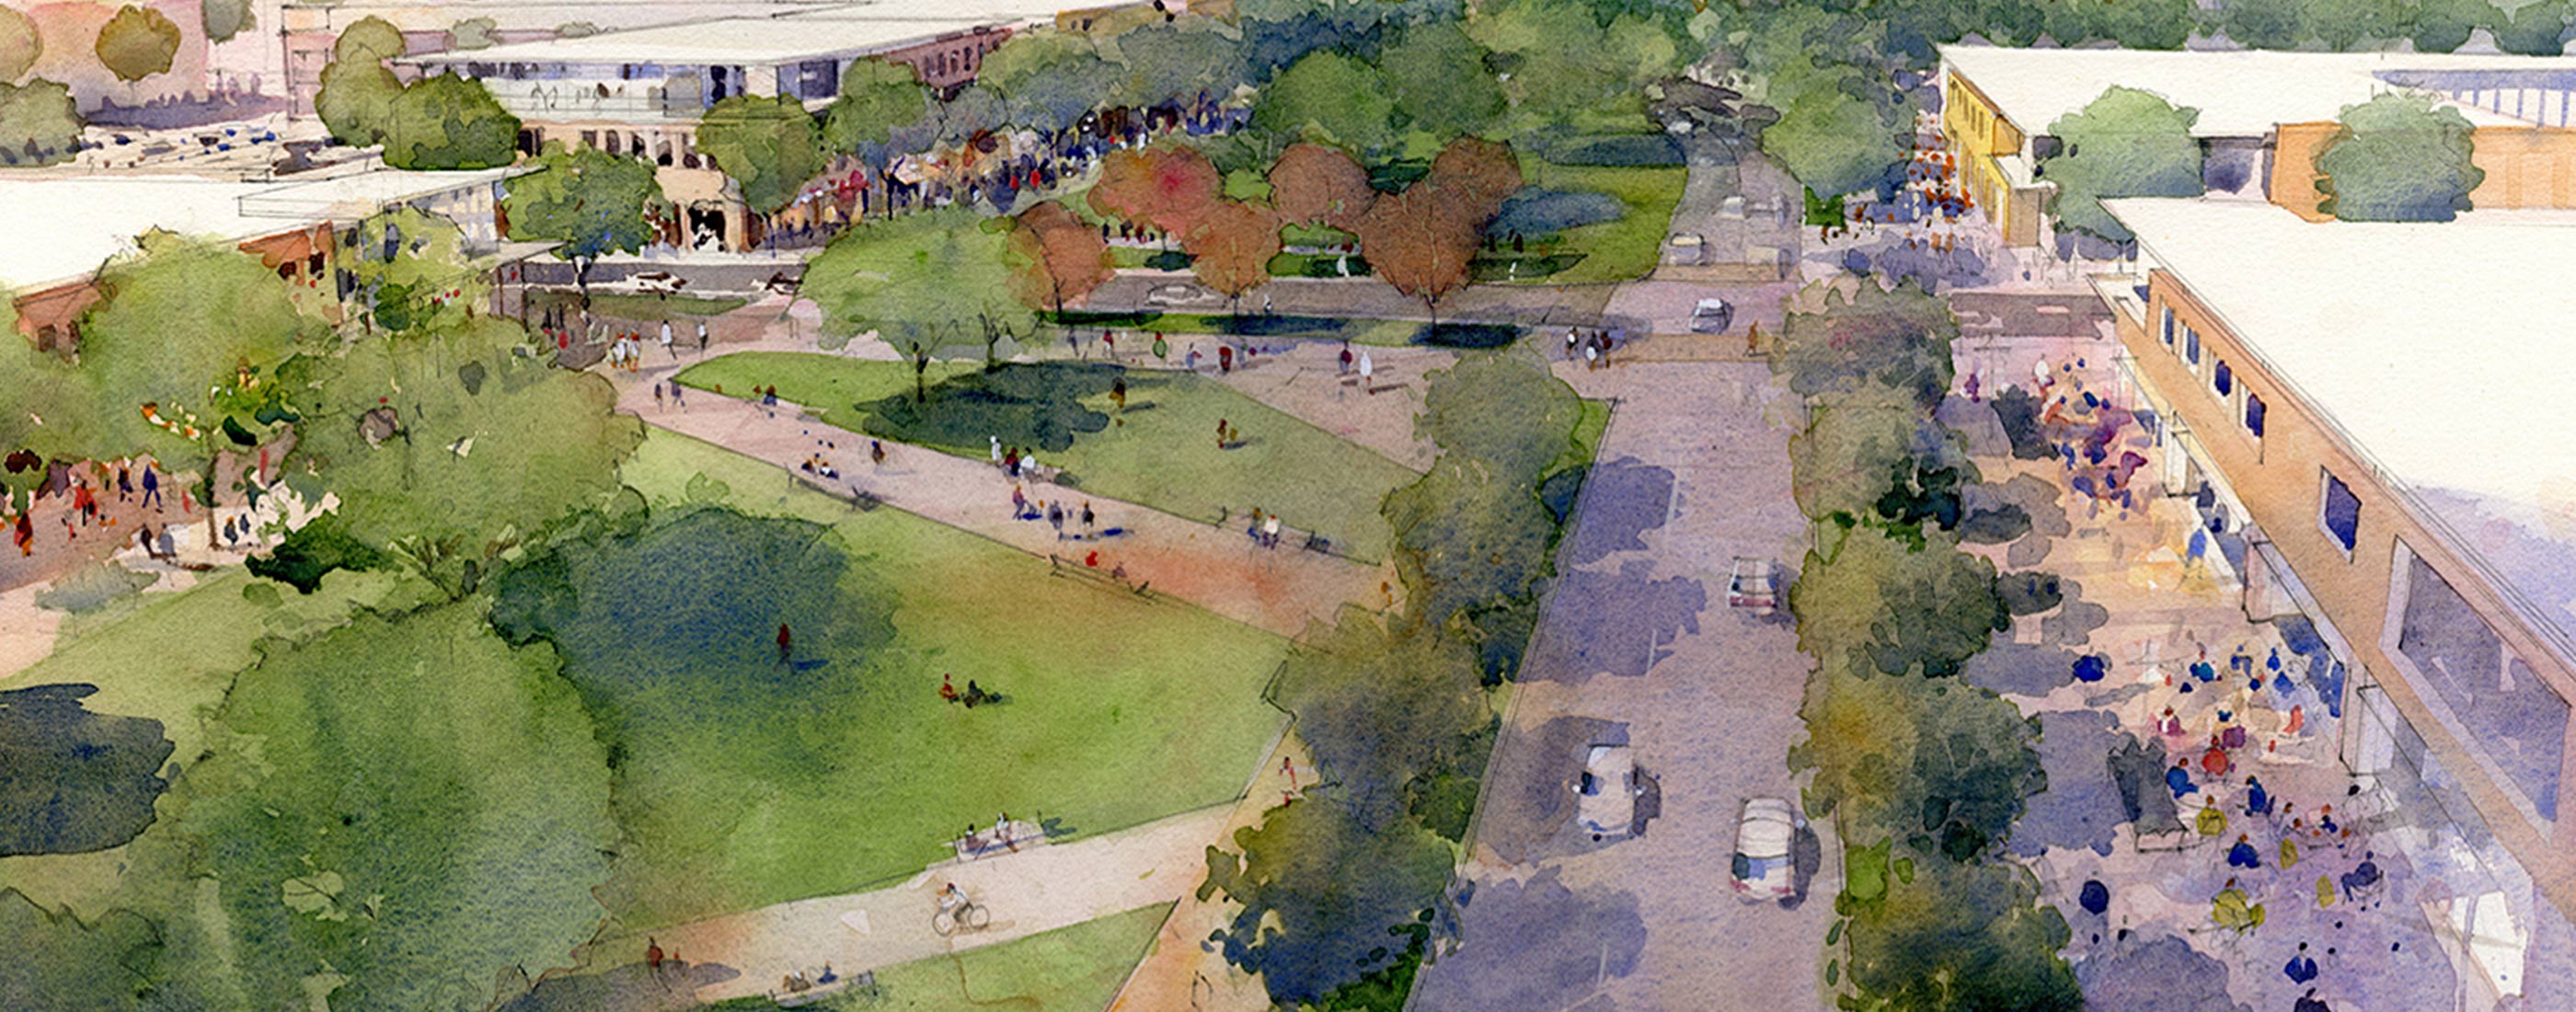 Water color of OHM Advisors' vision to develop Northland Mall into a mixed-use public space